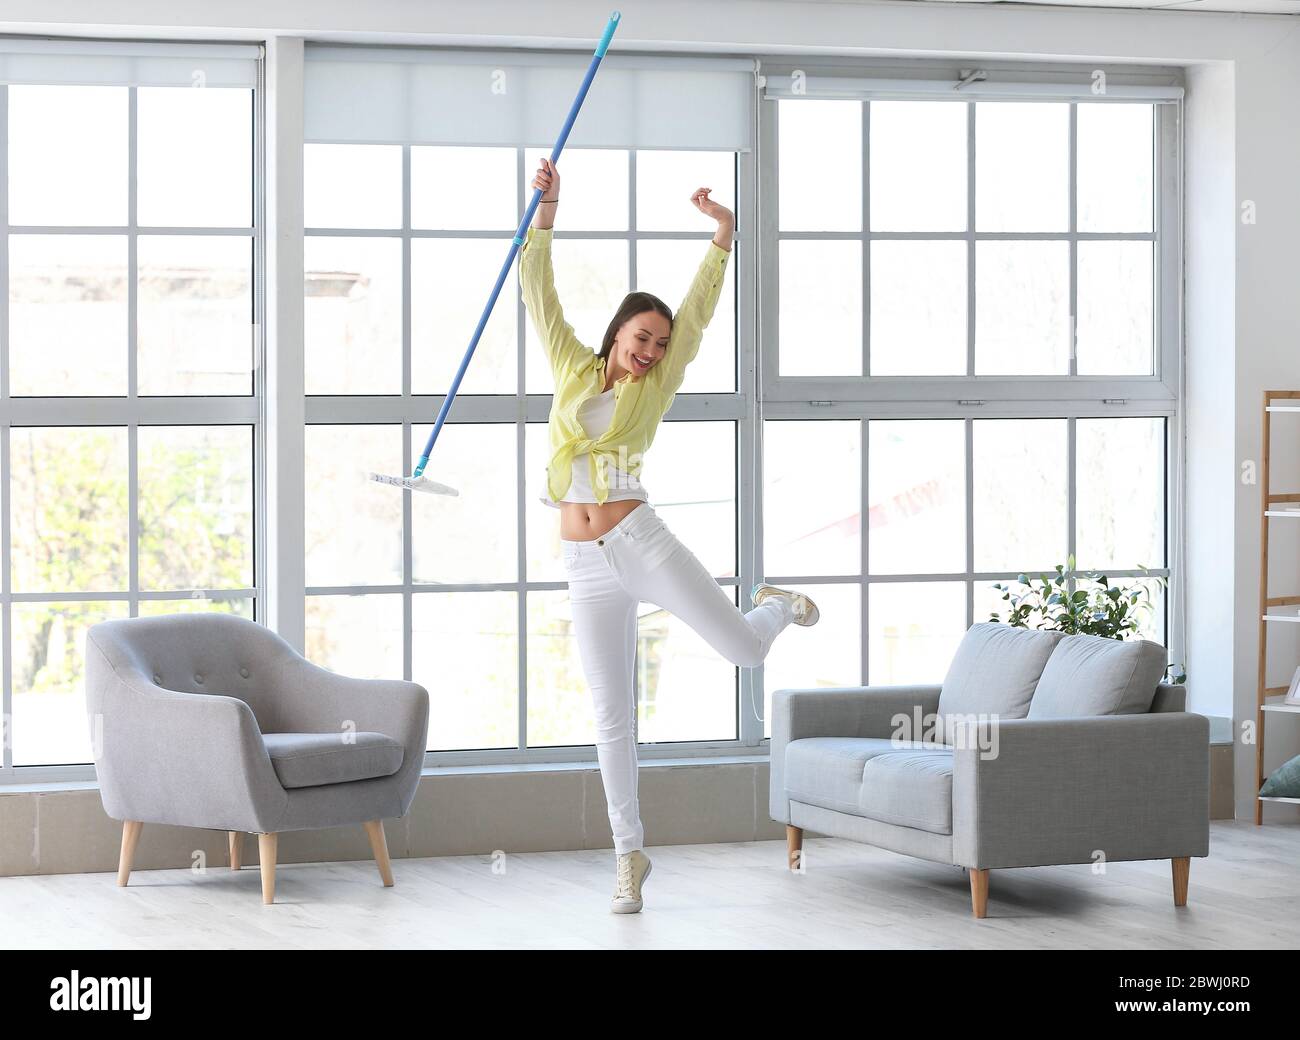 Young woman having fun while mopping floor in room Stock Photo